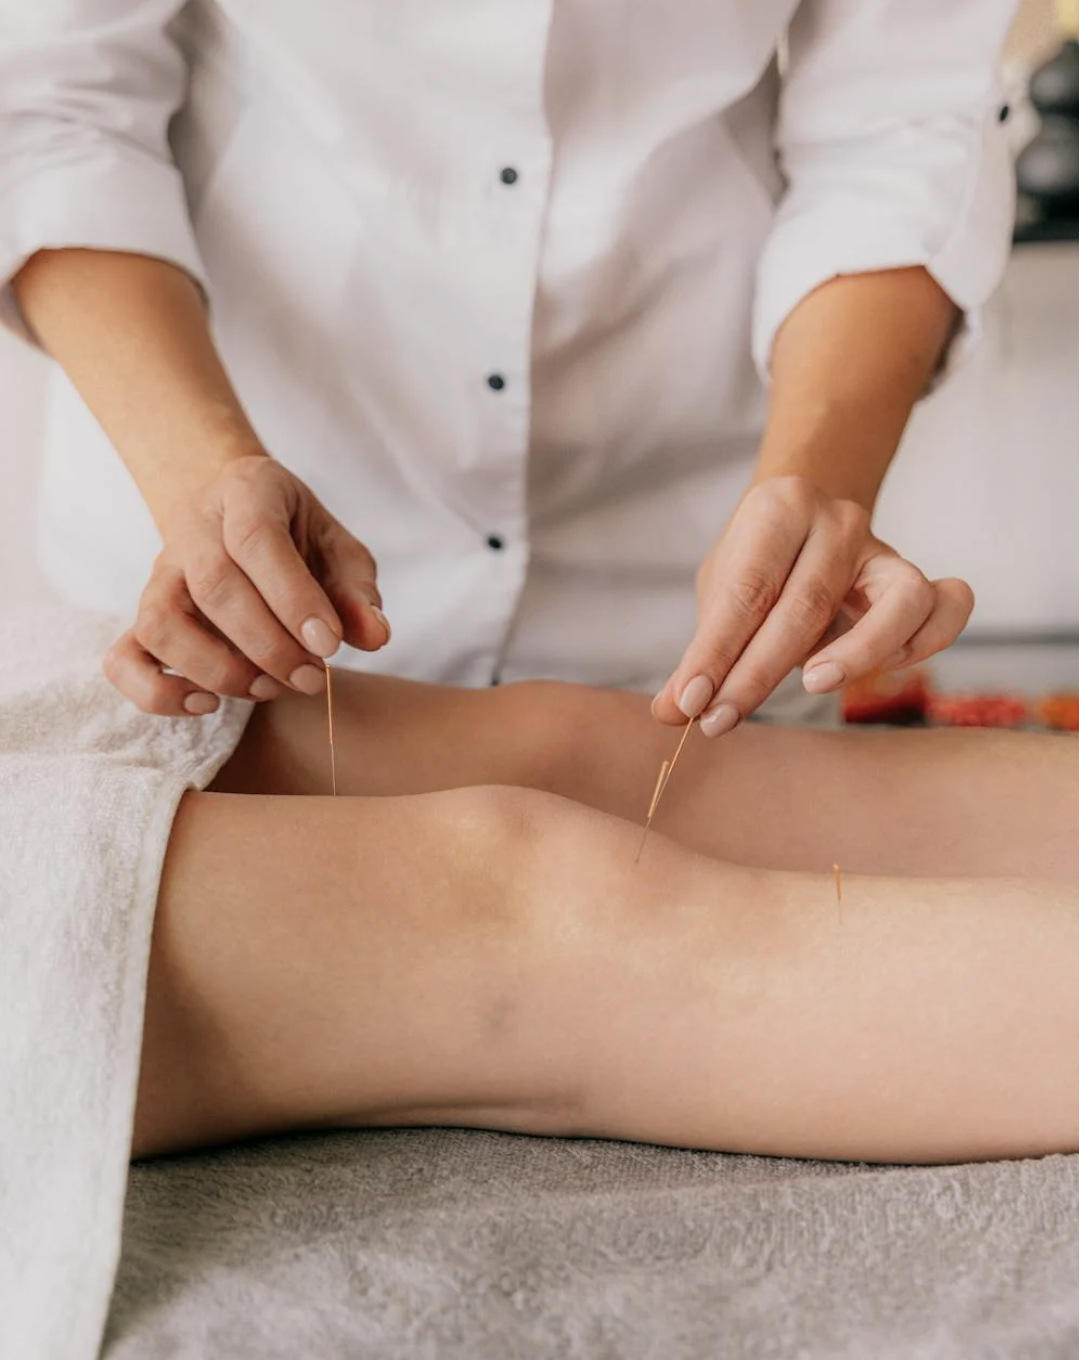 Acupuncturist administering acupuncture treatment on a patient's knee, employing fine needles as part of the therapeutic session